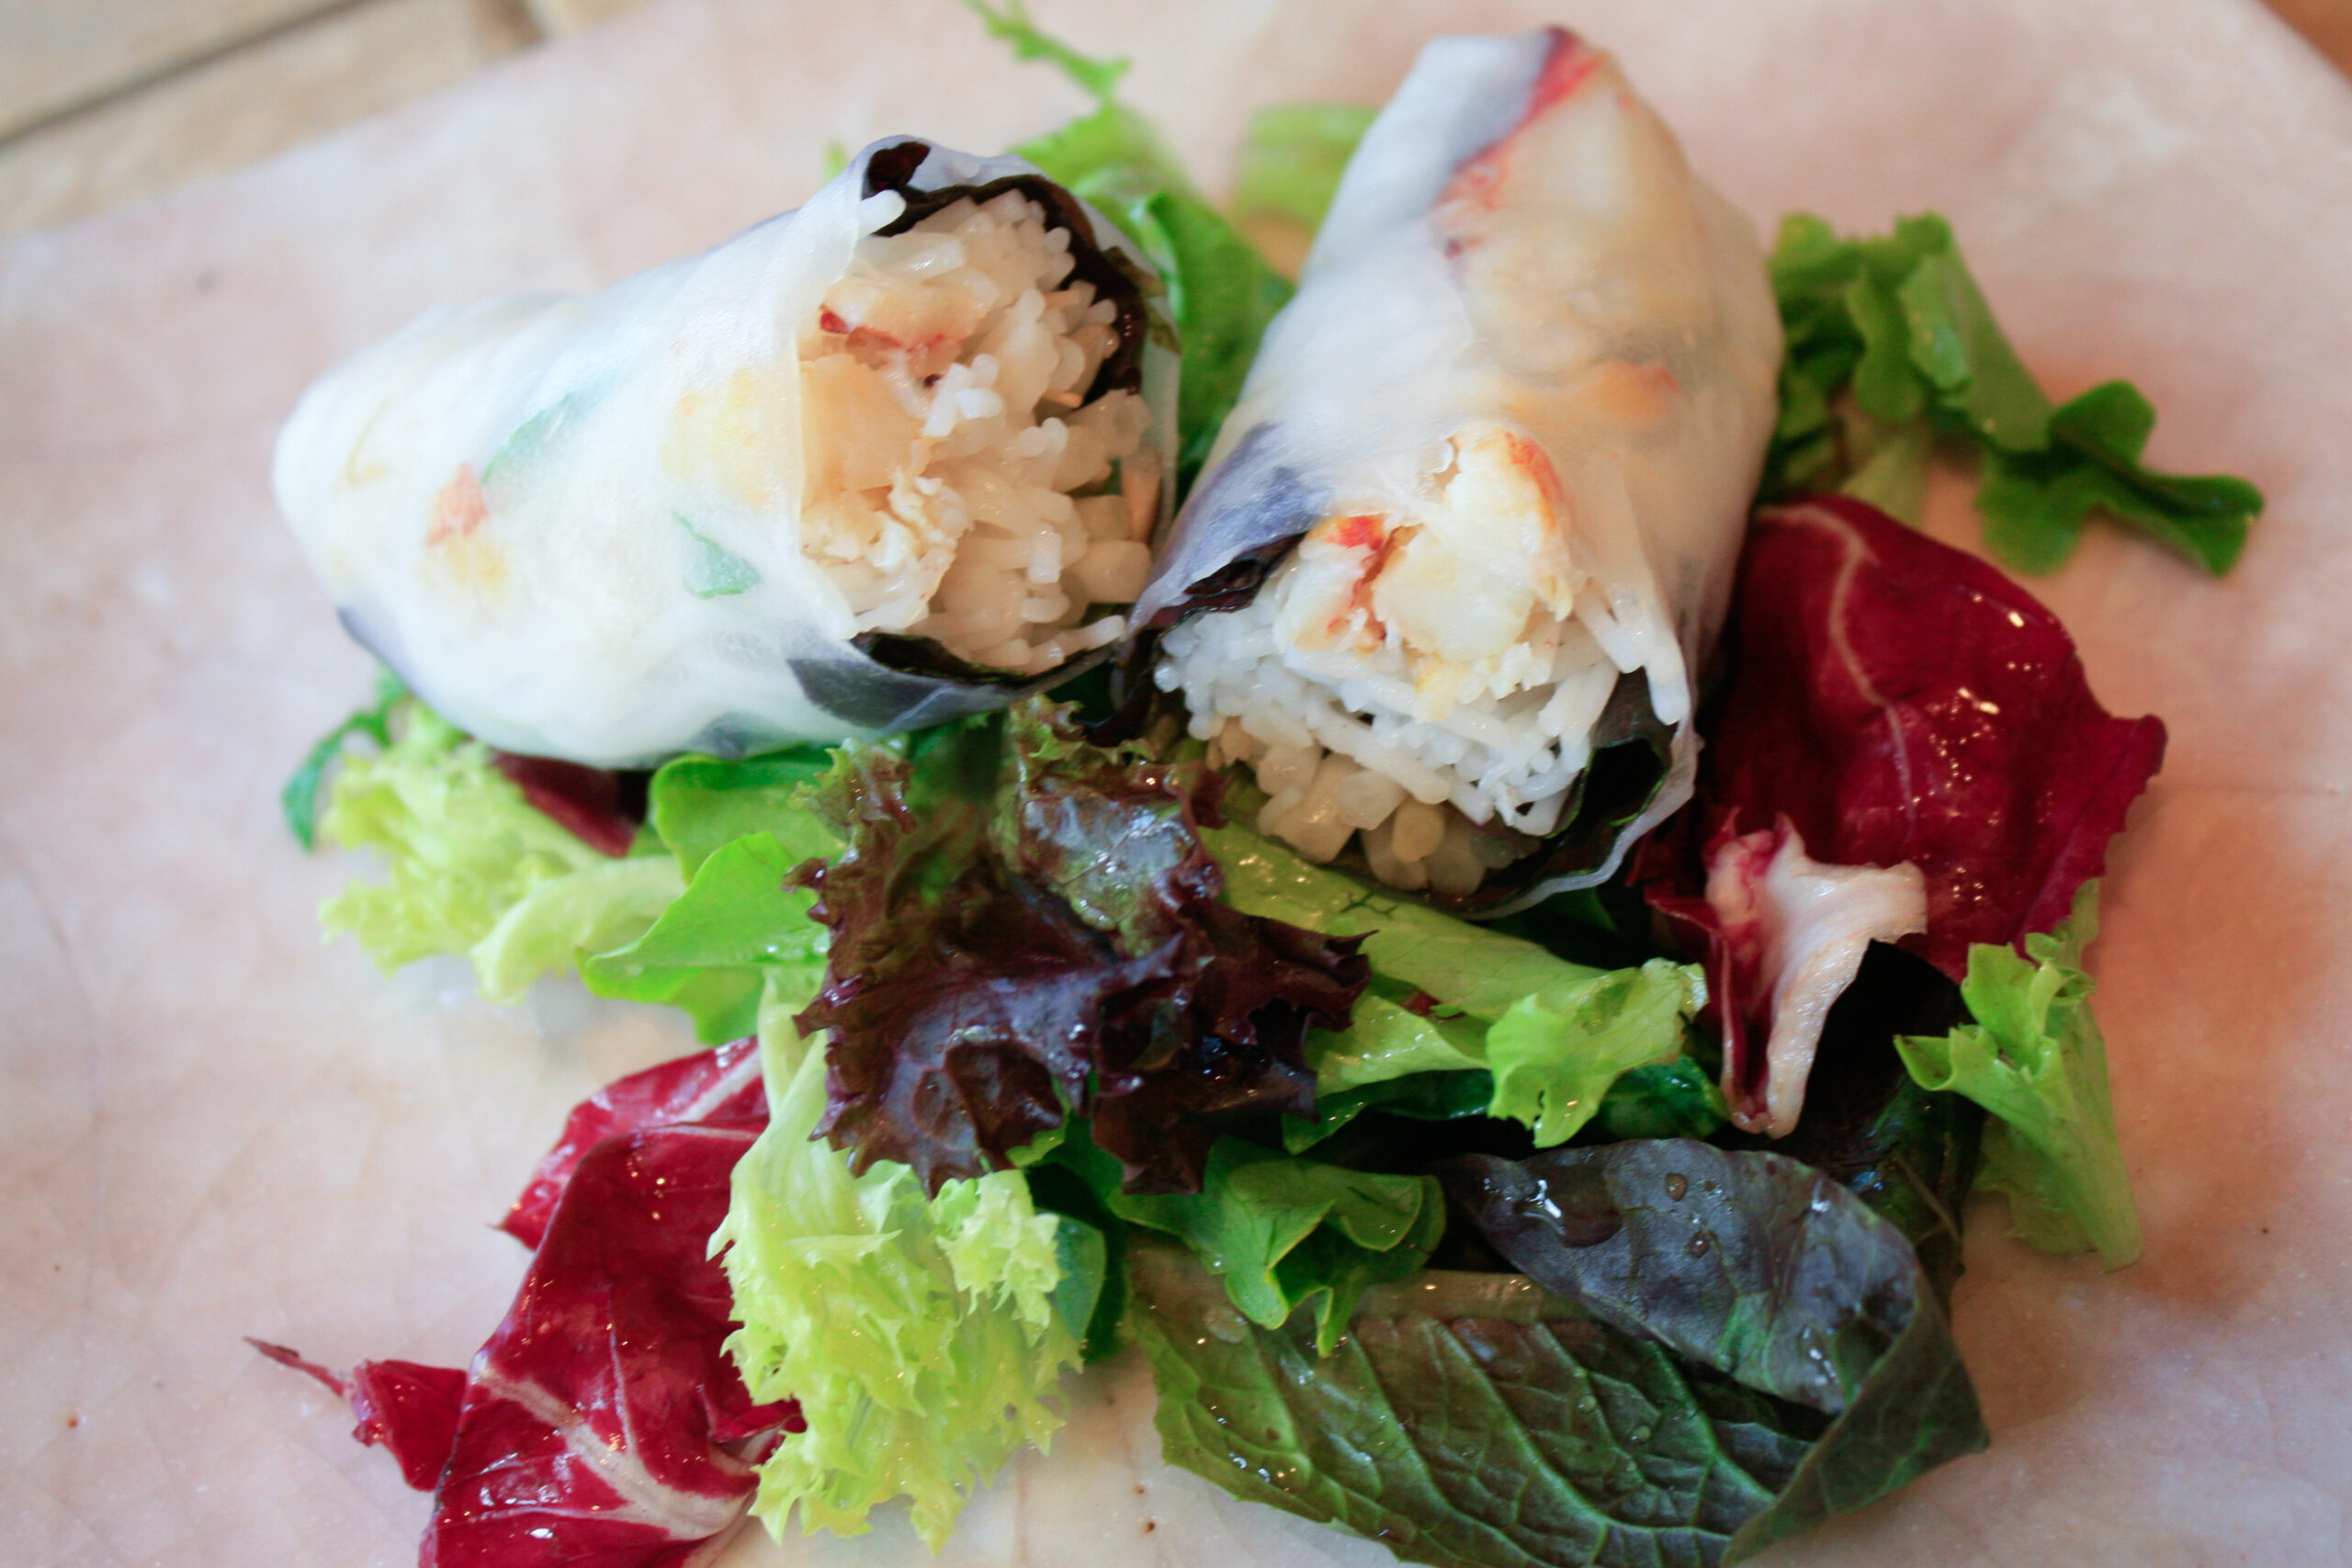 Celebrate spring with crab rolls